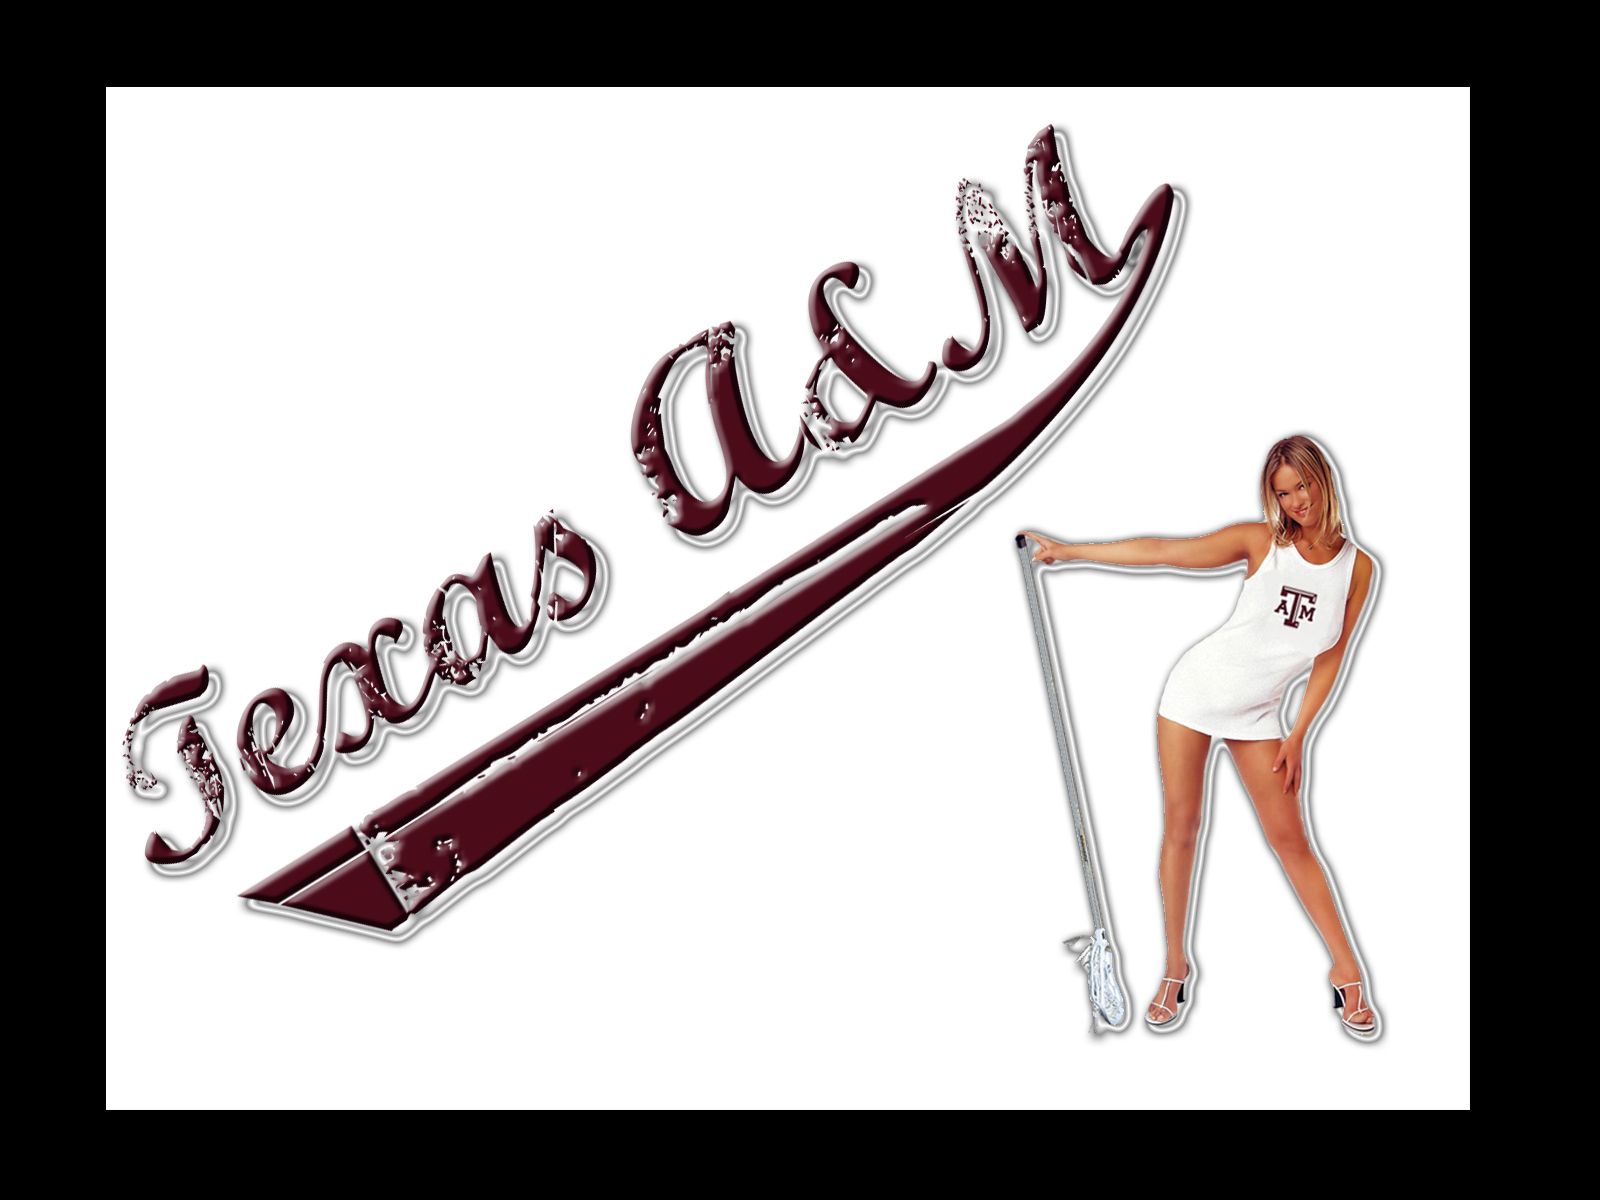 Texas AM Womens Lacrosse by bh06there on DeviantArt